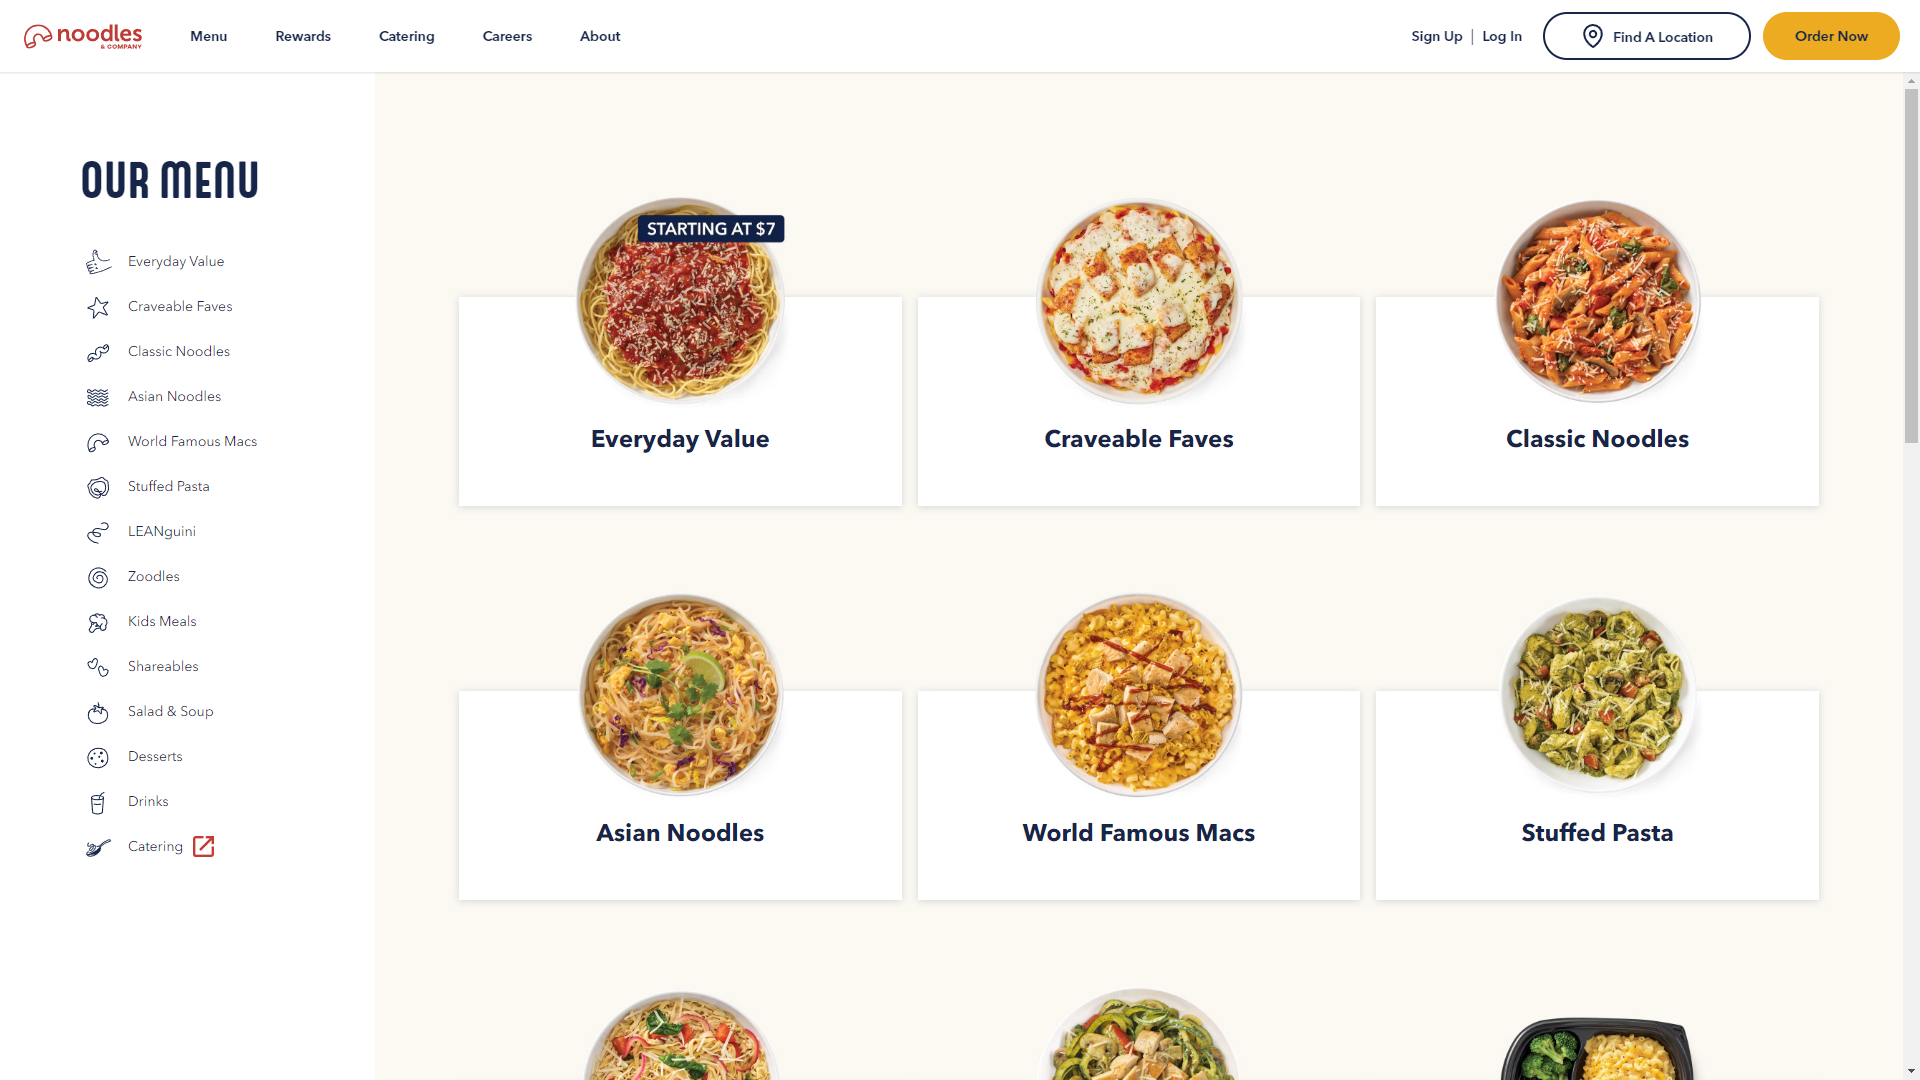 Screenshot of the Noodles & Company website showing the menu page. A handful of category options are presented, such as 'Everyday Value' and 'Craveable Faves'. Each choice is accompanied by a photo of a bowl of pasta.